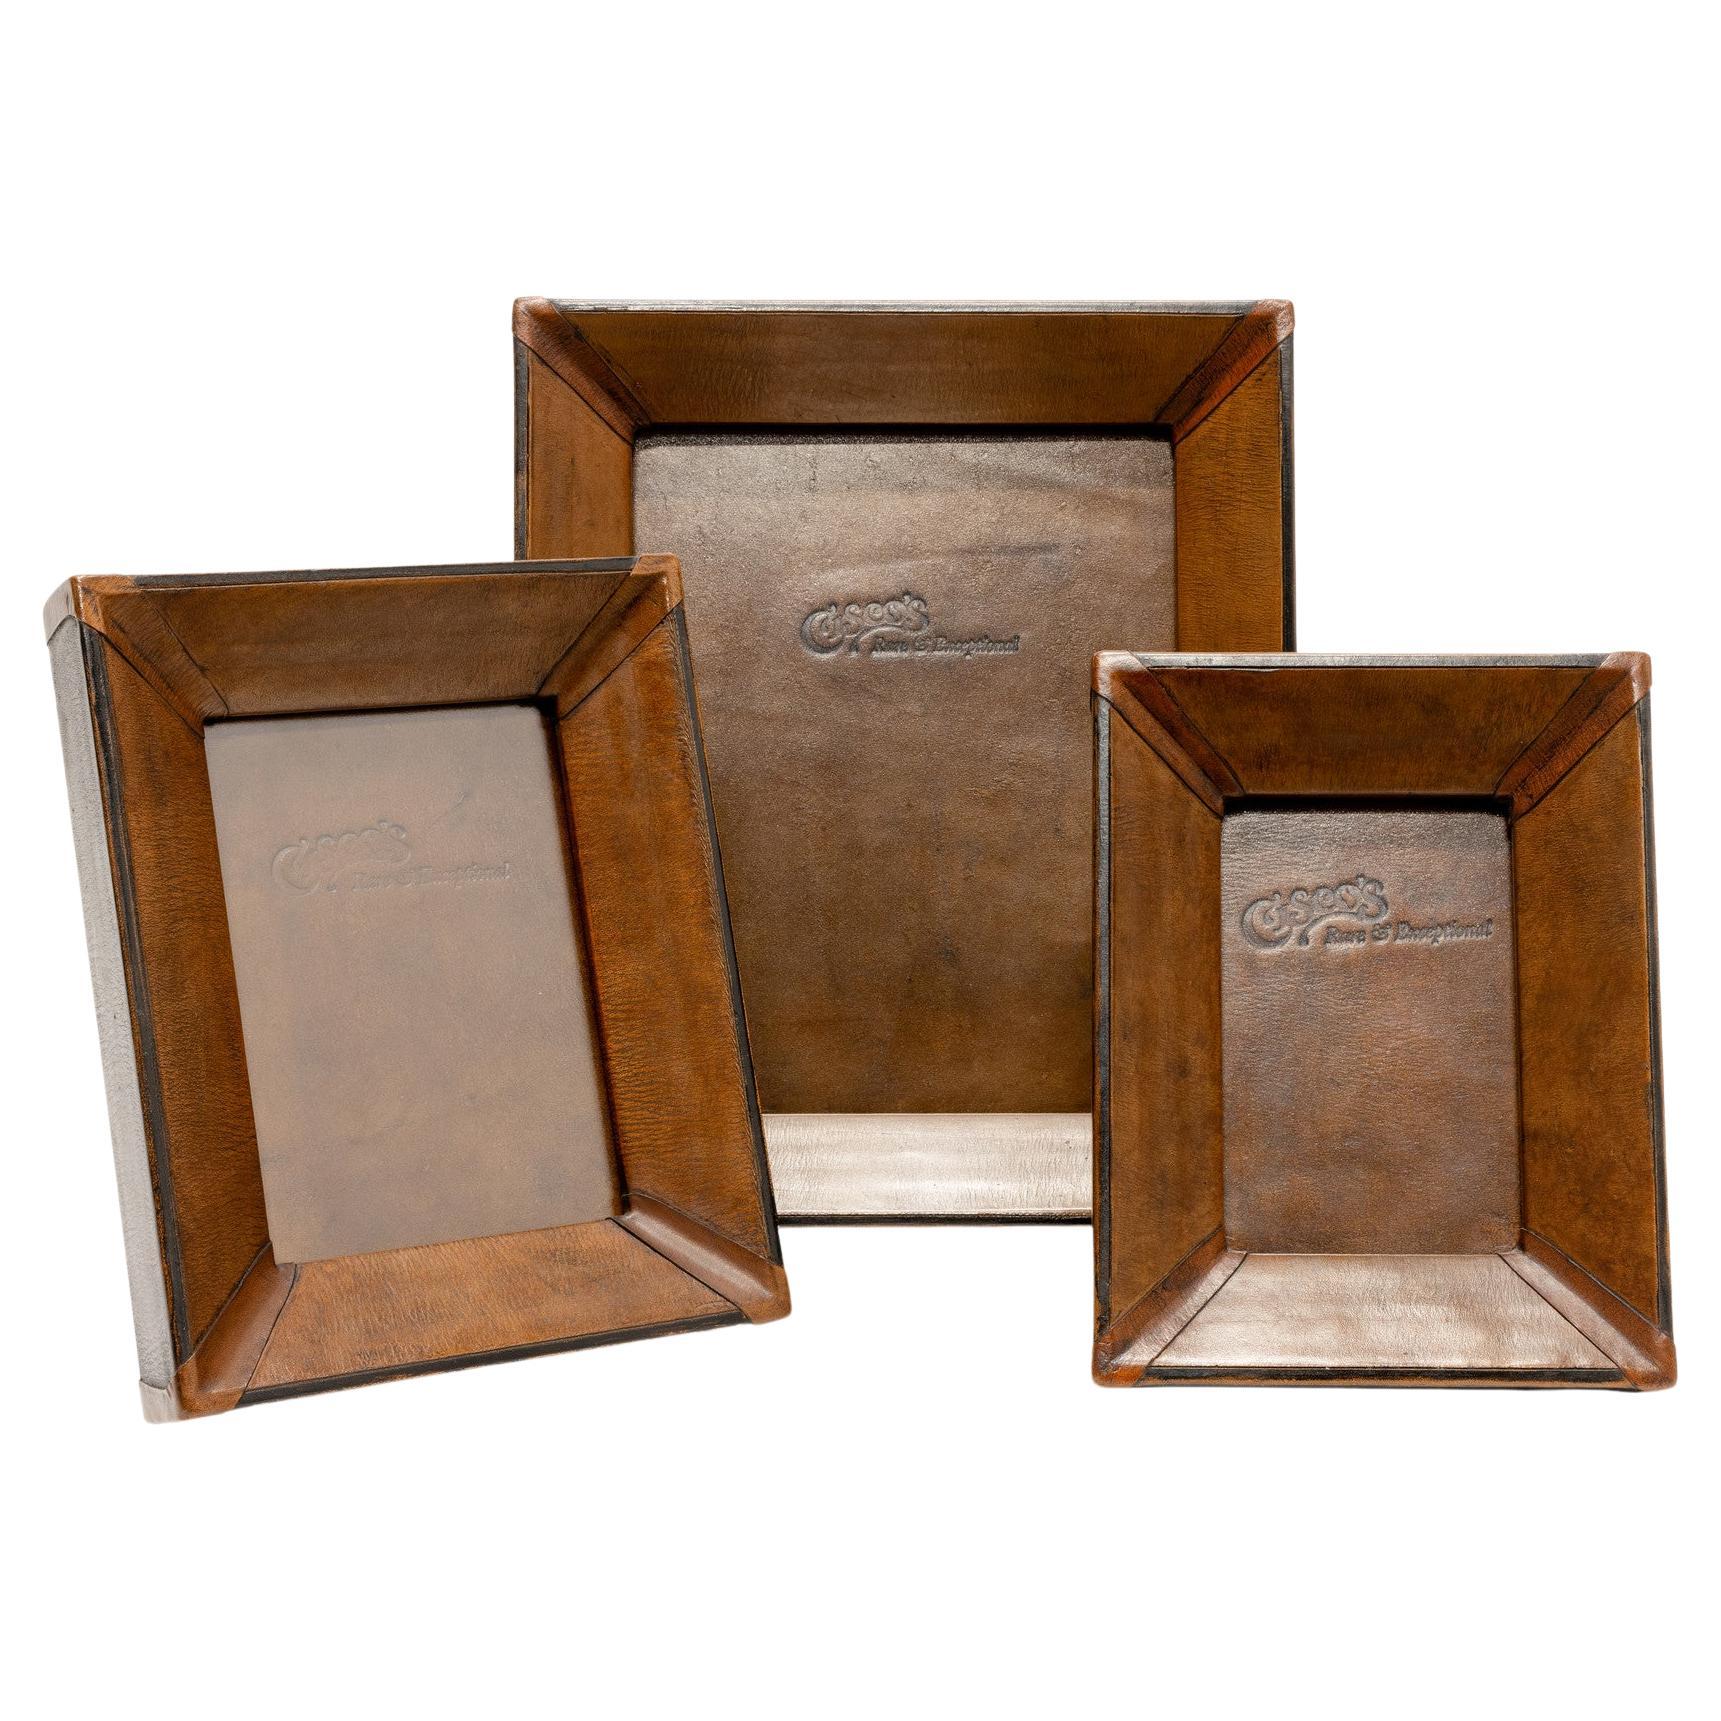 5x7 Medium Brown & Black Leather Tabletop Picture Frame- The Saddle Shop  For Sale